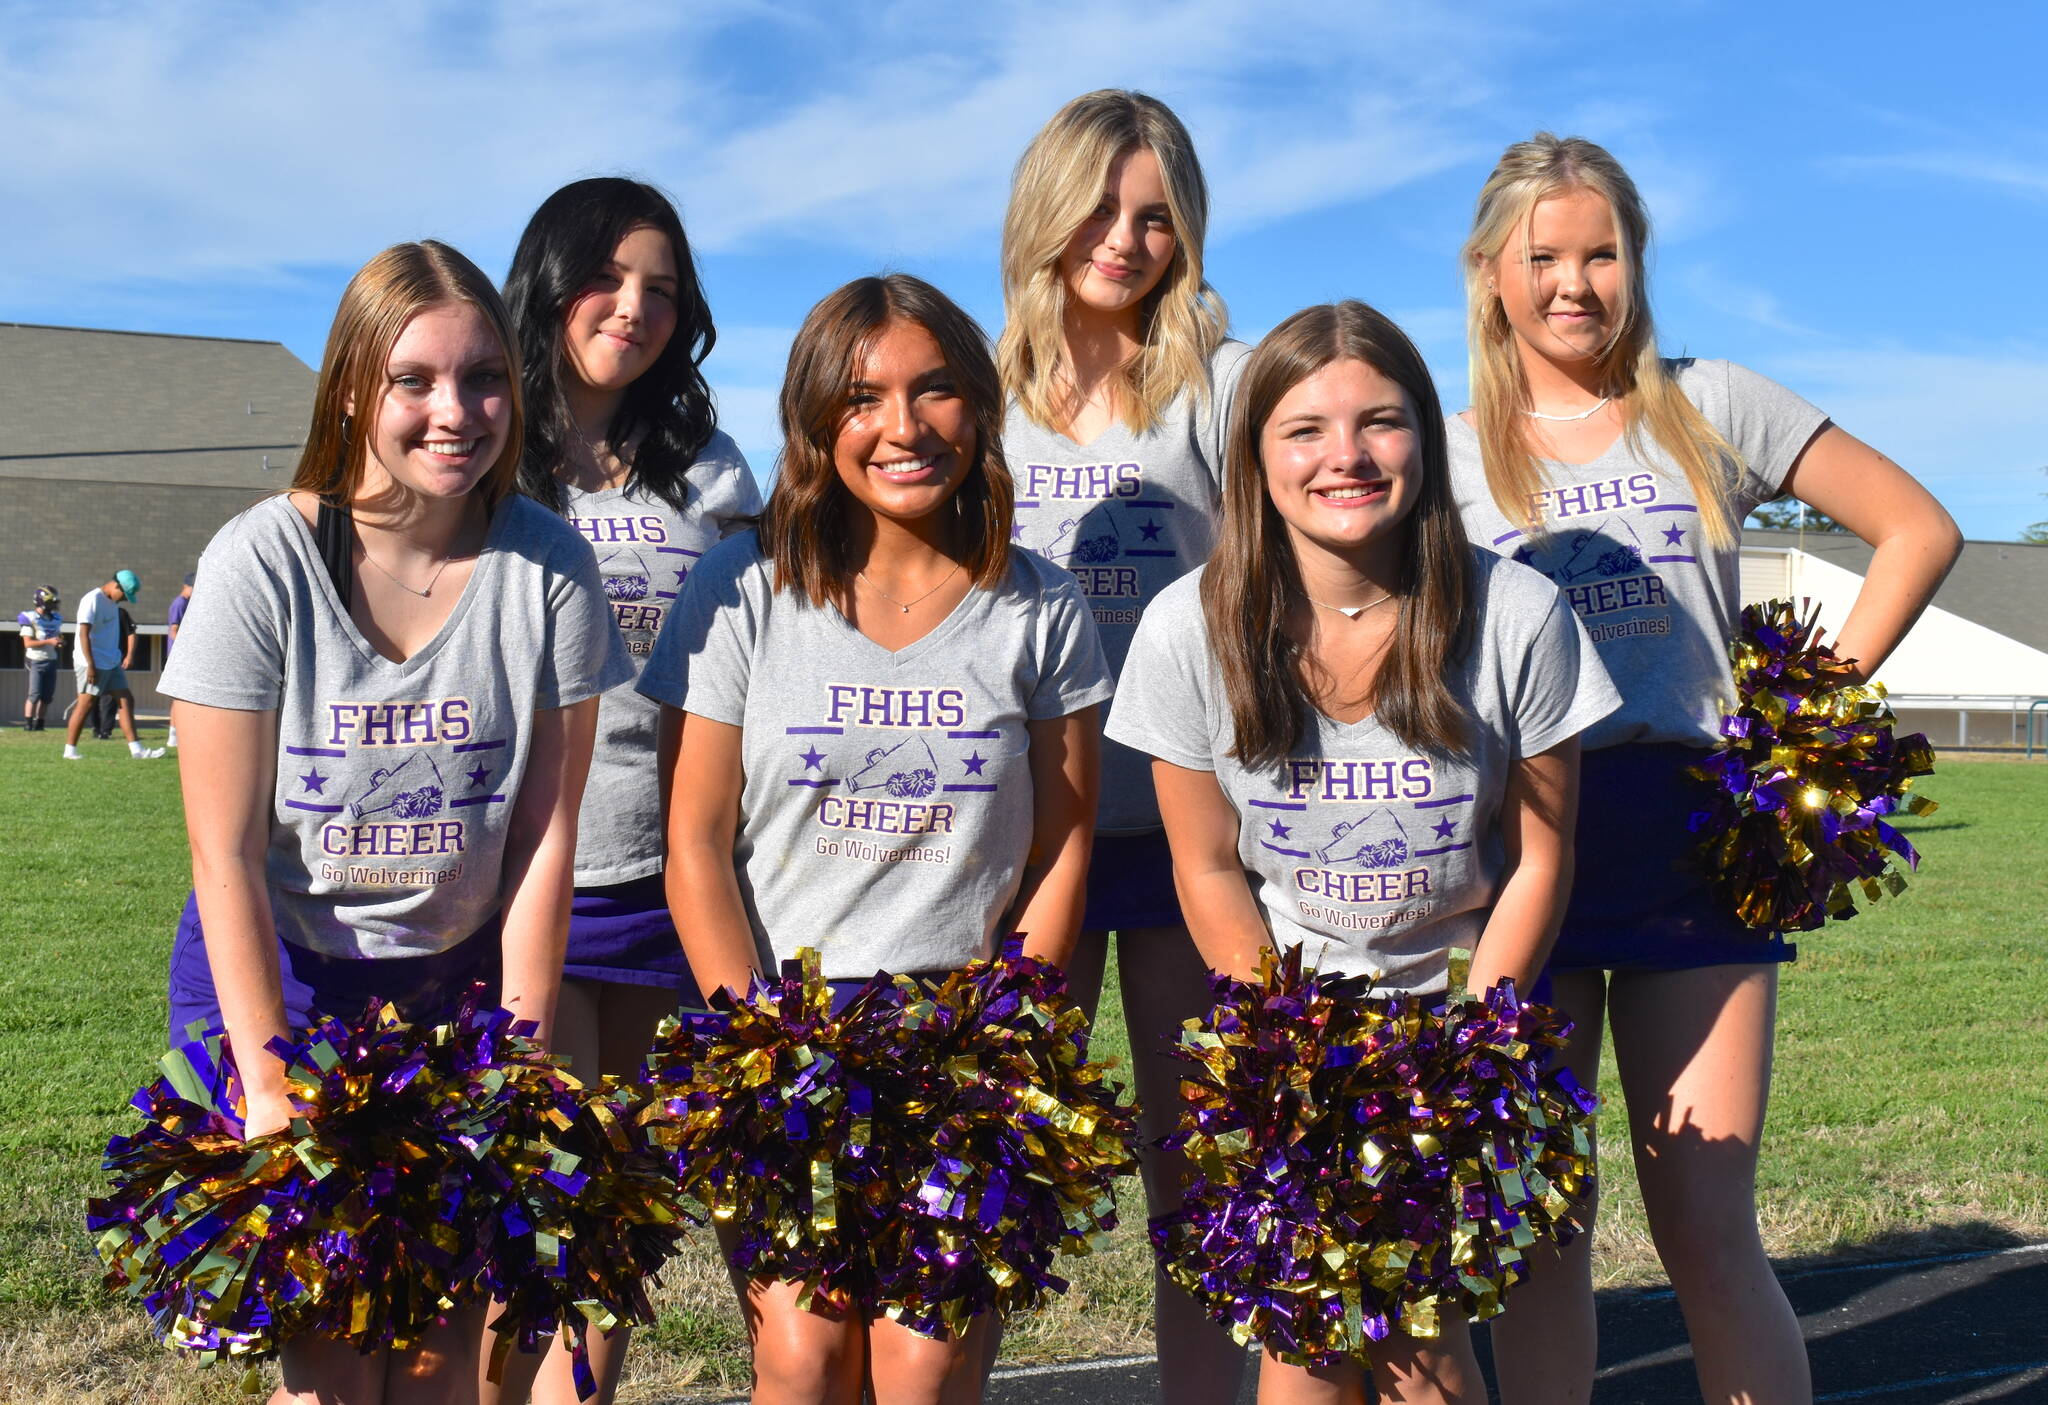 The Friday Harbor High School Cheerleaders are ready to cheer on the teams this season. From left, back row: Sami Carrillo, Chase Lee, and Paloma Waldron. Front row, from left: Jasmyn McEwen, Lilli Turnbow, and Paige Carlton-Fleirl.
Photo by Kelley Balcomb-Bartok